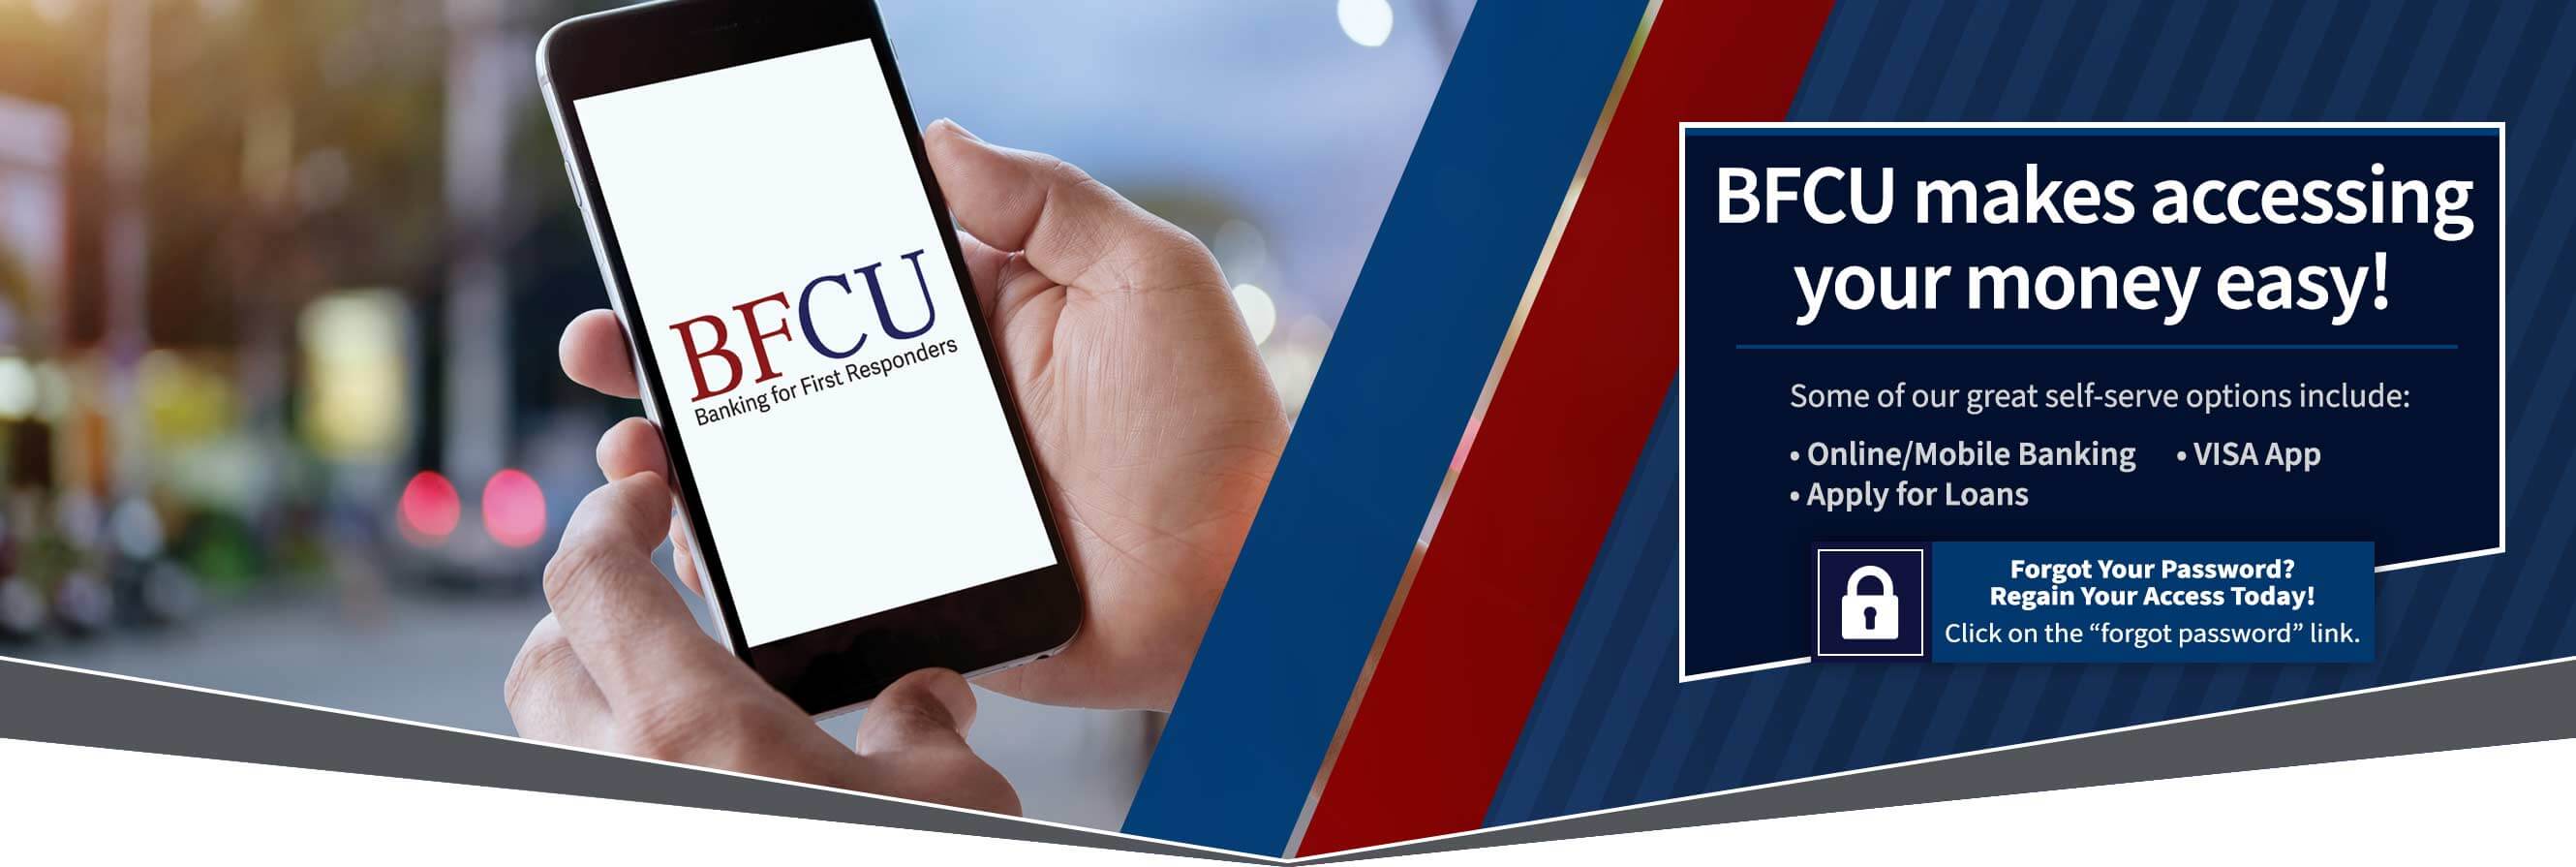 BFCU makes accessing your money easy with our electronic services